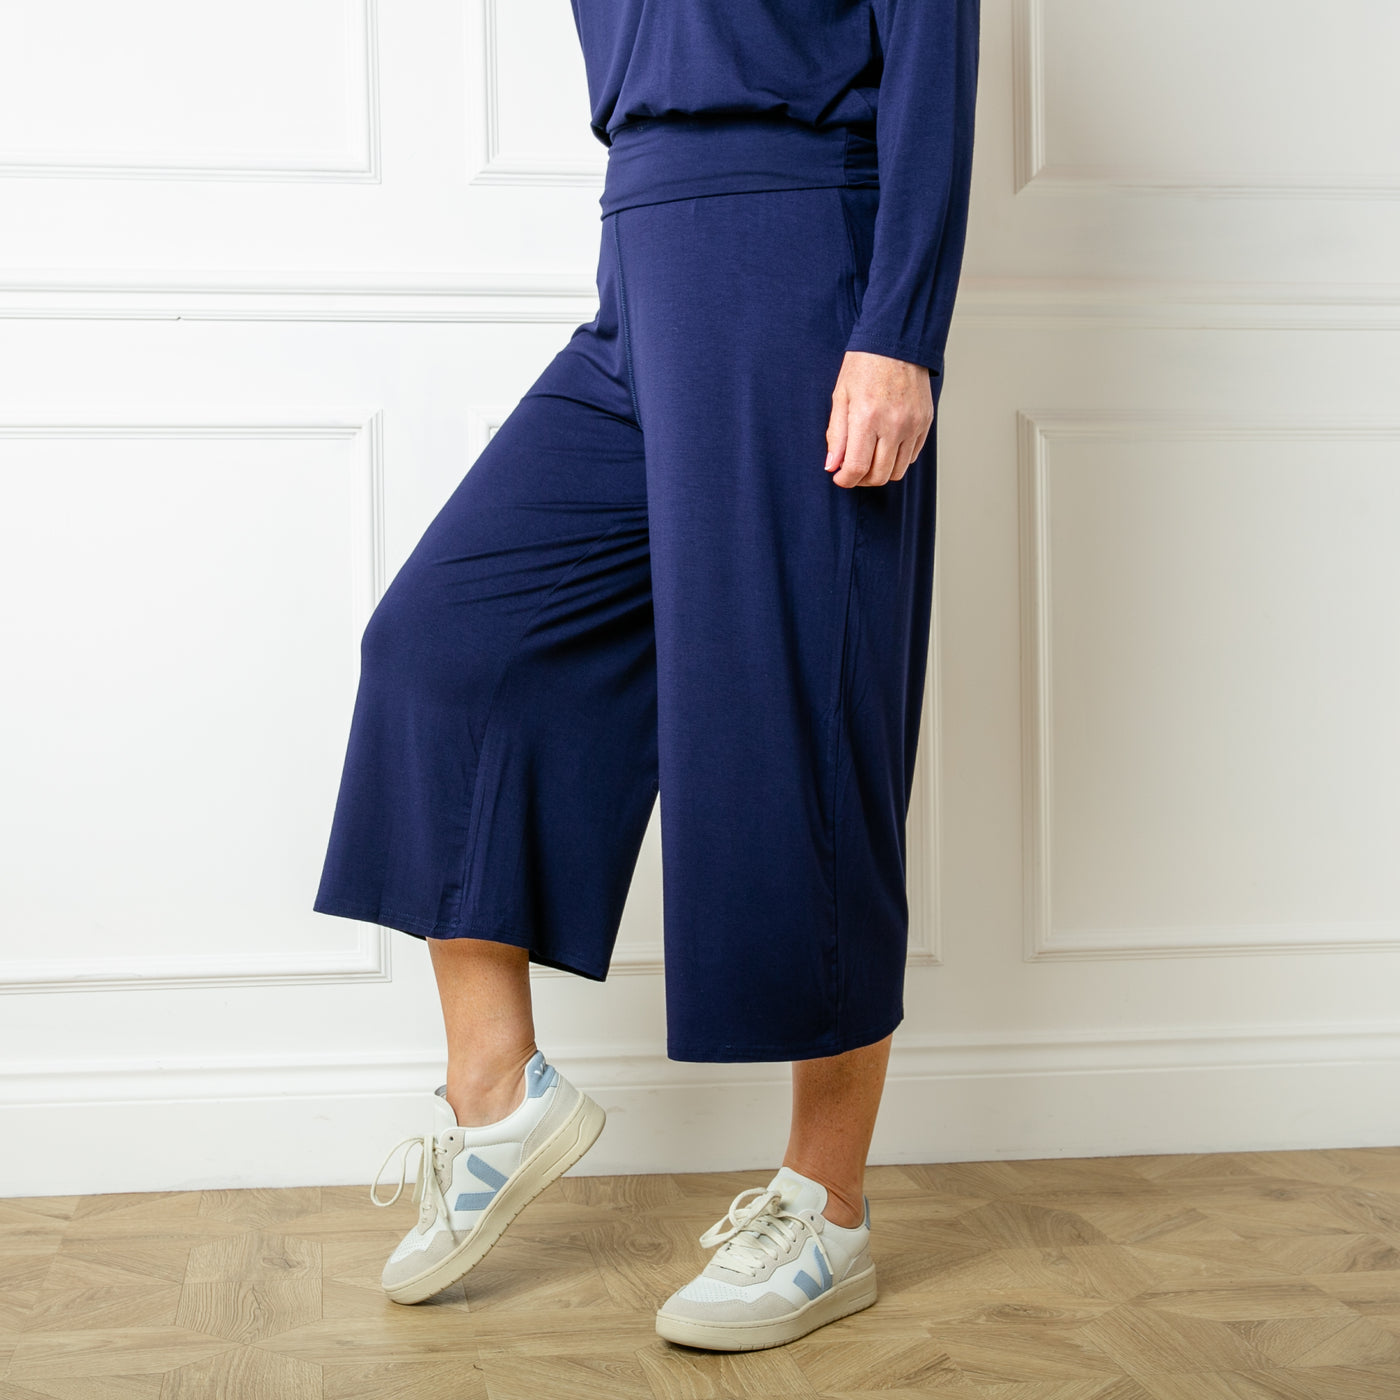 The navy blue Bamboo Fold Over Pants with a stretchy elasticated waistband which can be rolled or folded for desired fit and comfort